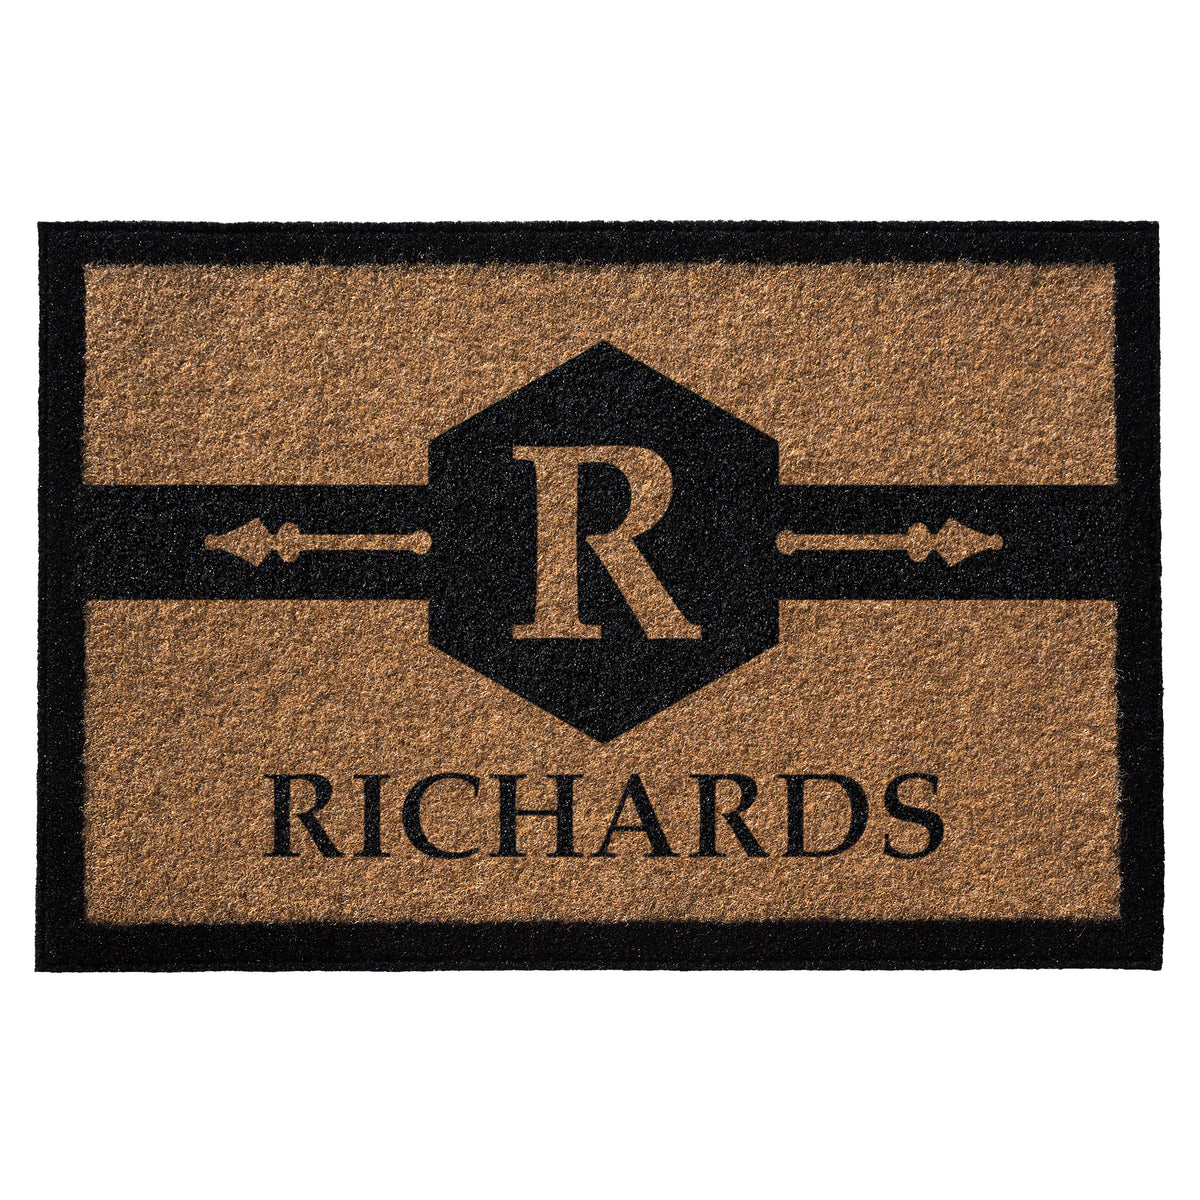 Infinity Custom Mats™ All-Weather Personalized Door Mat - STYLE: RICHARDS COLOR:TAN - rugsthatfit.com